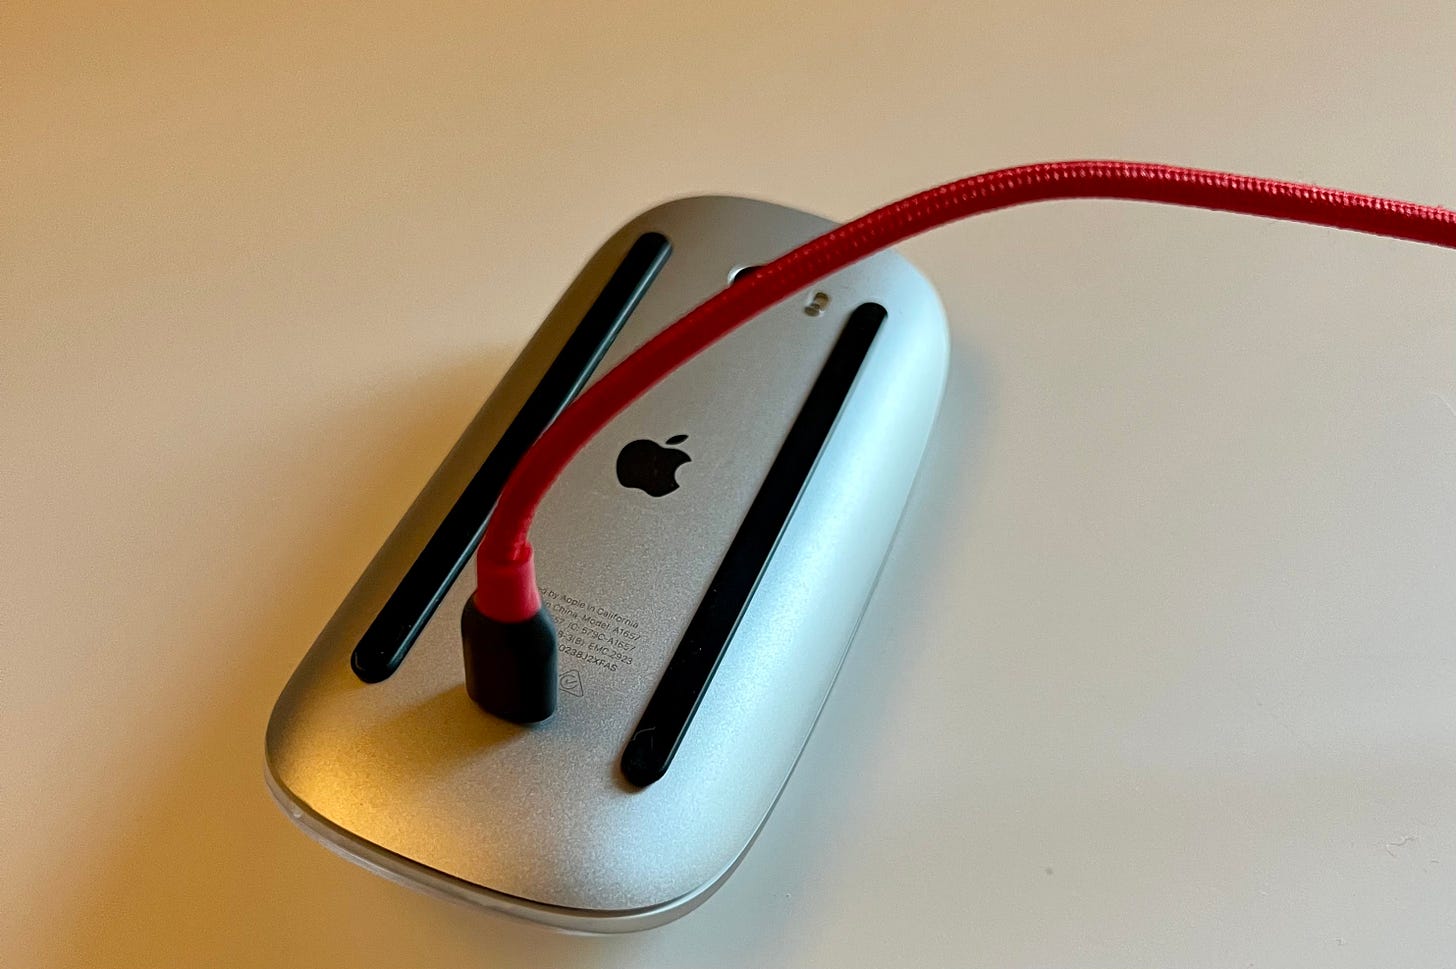 The Magic Mouse flipped over, ready to be charged.